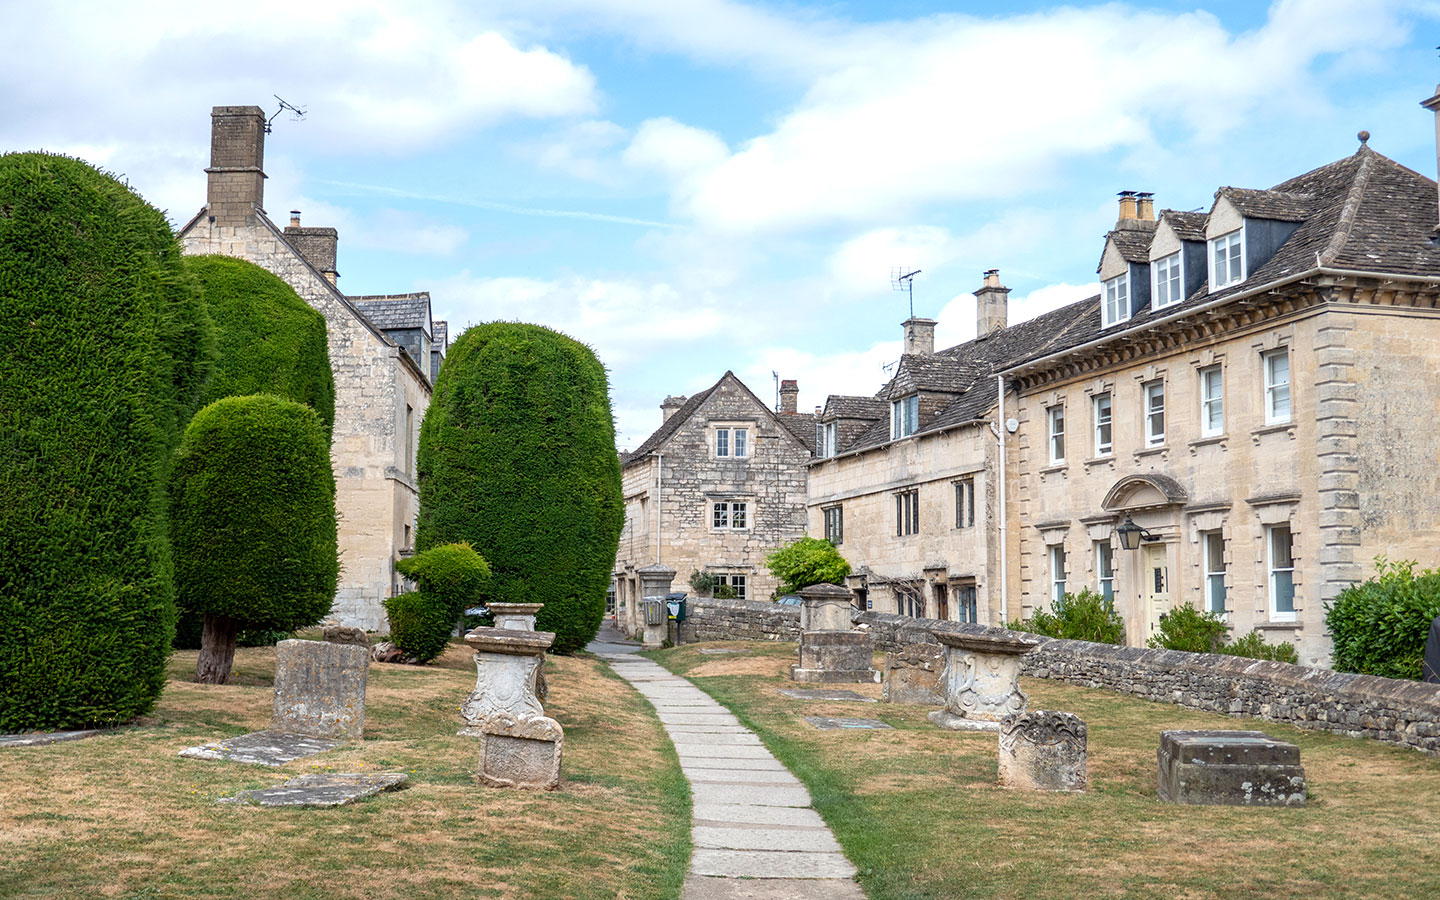 Things to do in Painswick, Cotswolds: A local’s guide